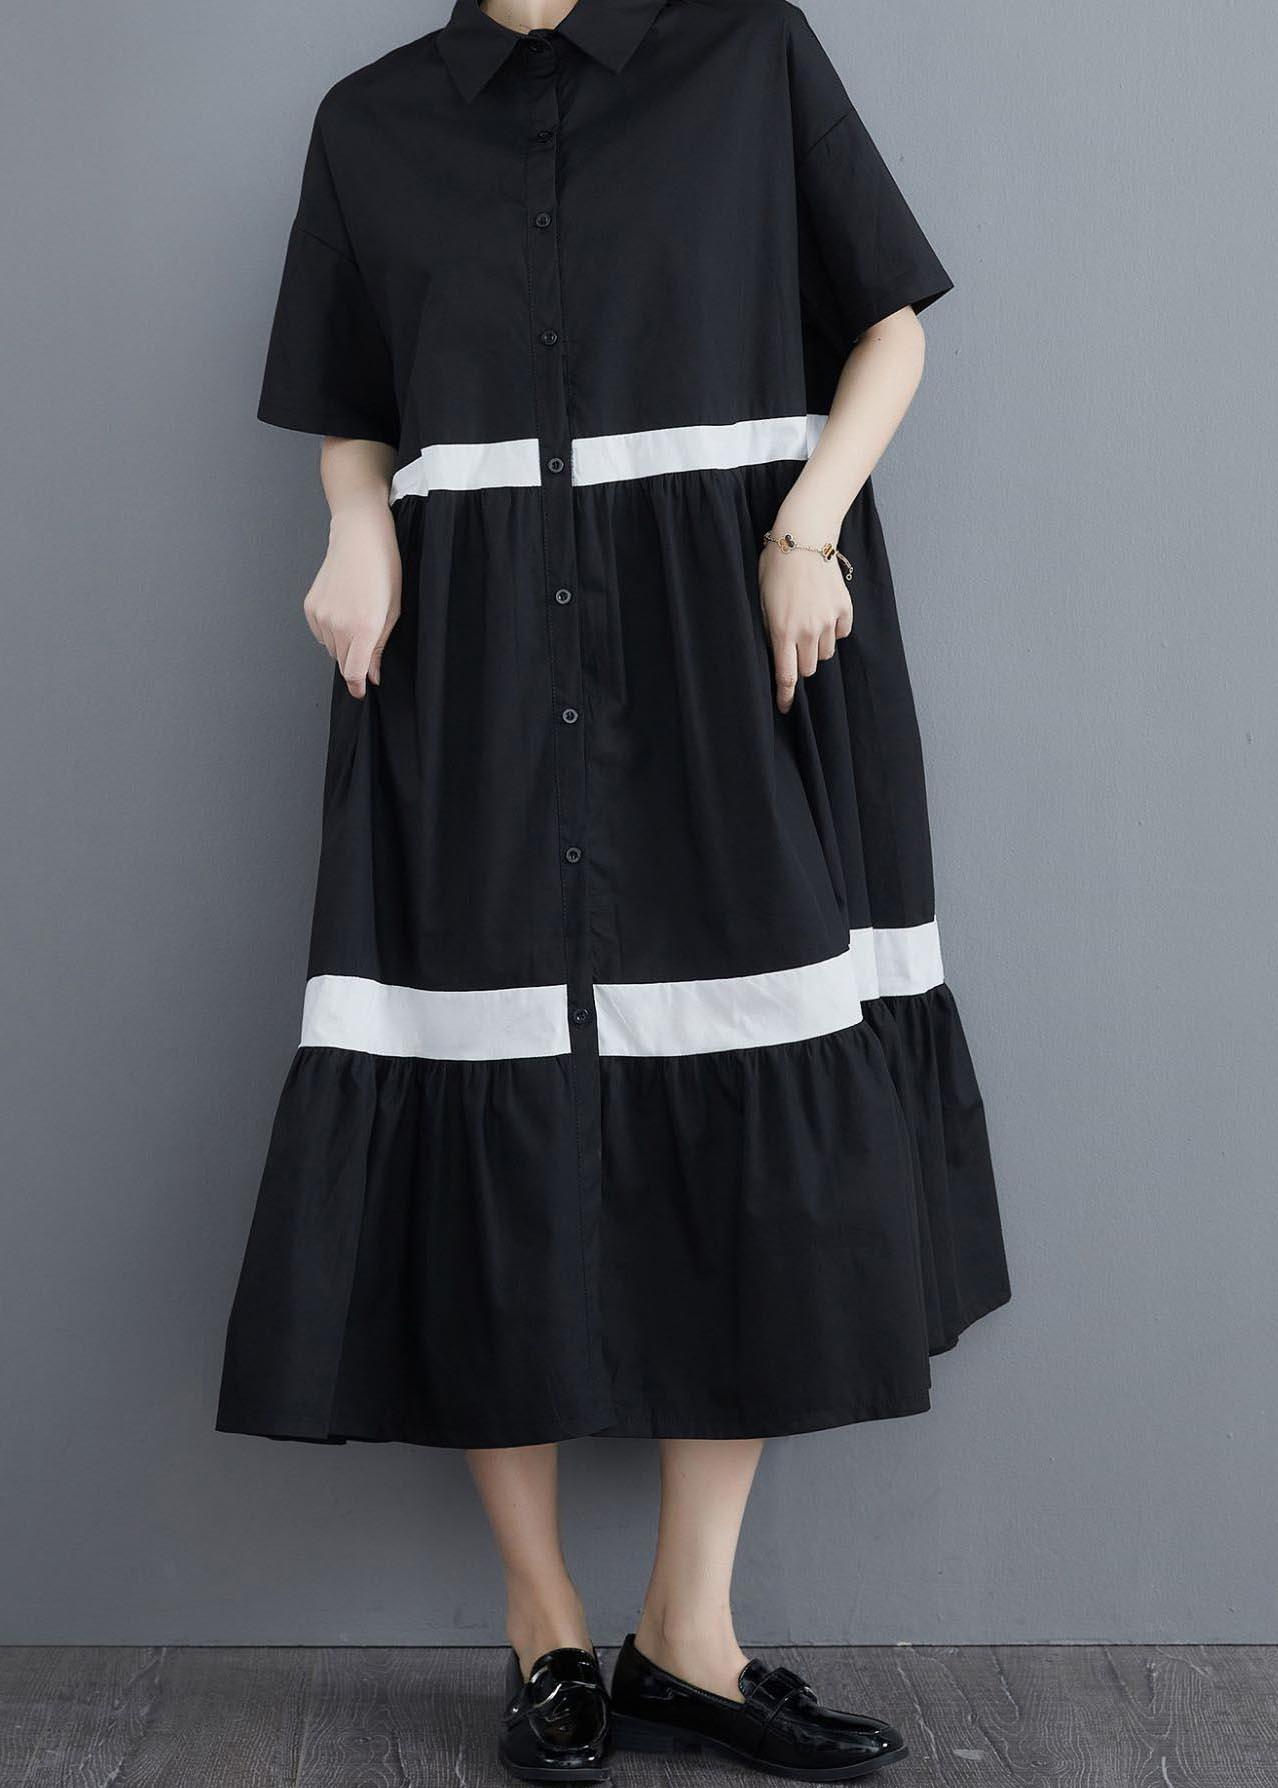 Style Black Patchwork Cotton Button Summer Vacation Dresses - Omychic